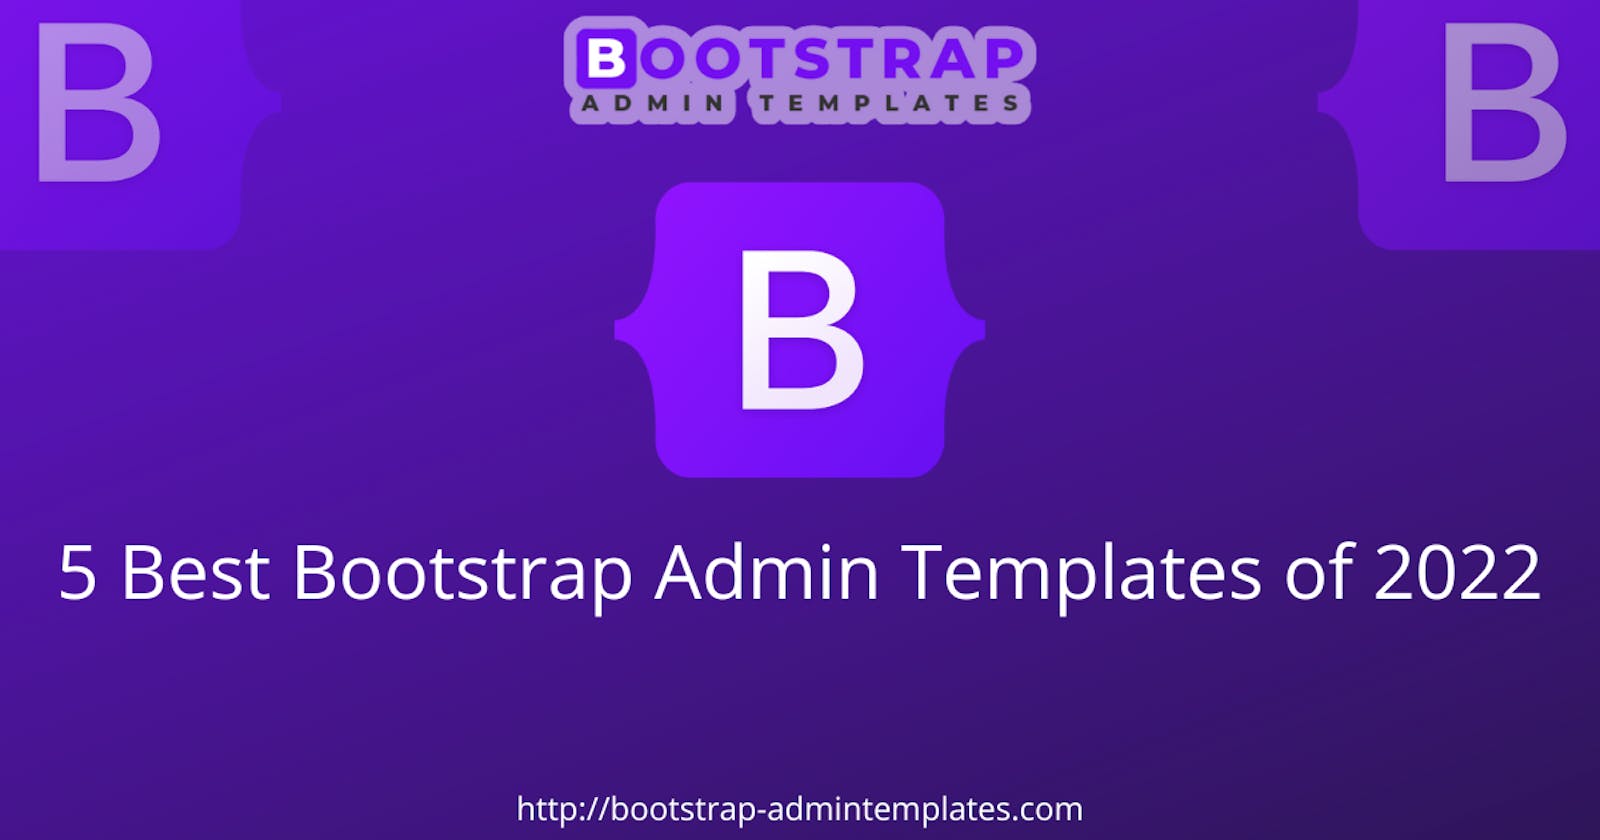 5 Best Bootstrap Admin Templates of 2022